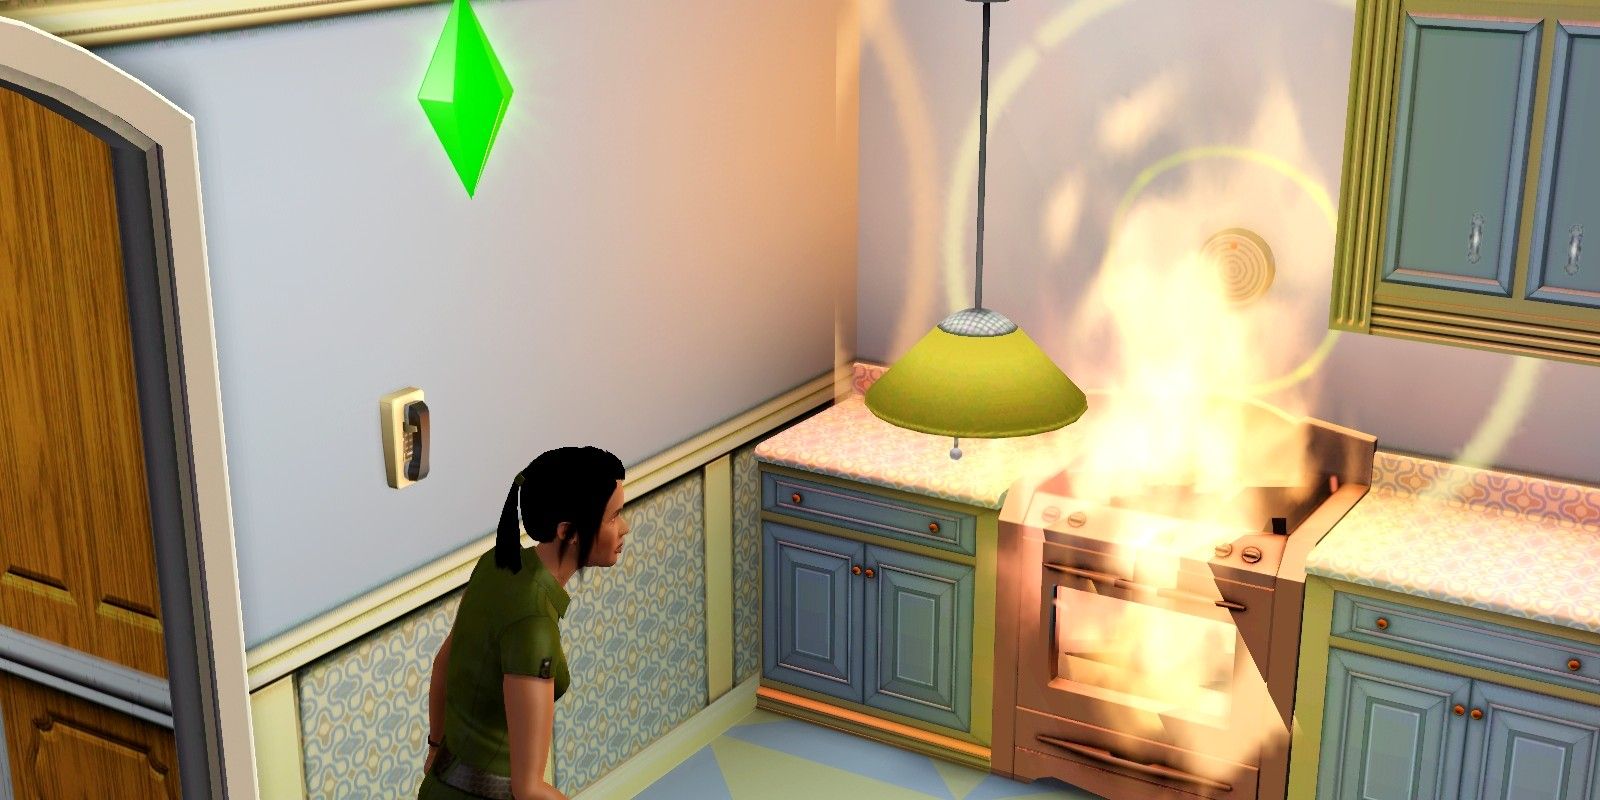 how to start fire in sims 4